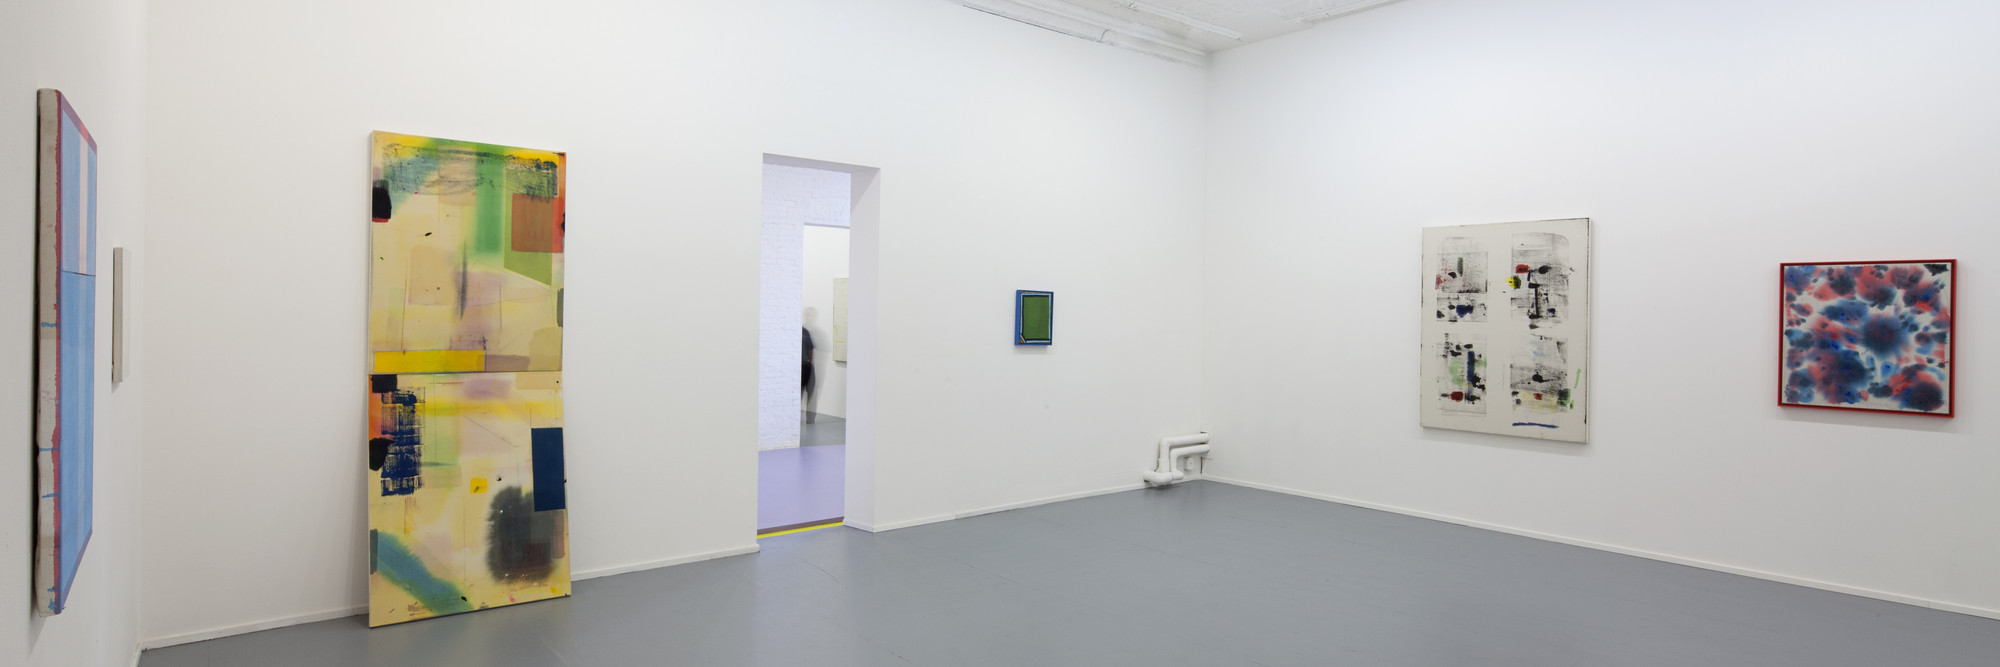 Installation view of Matt Connors: Impressionism at MoMA PS1, October 12–December 31, 2012. Photo: Matthew Septimus